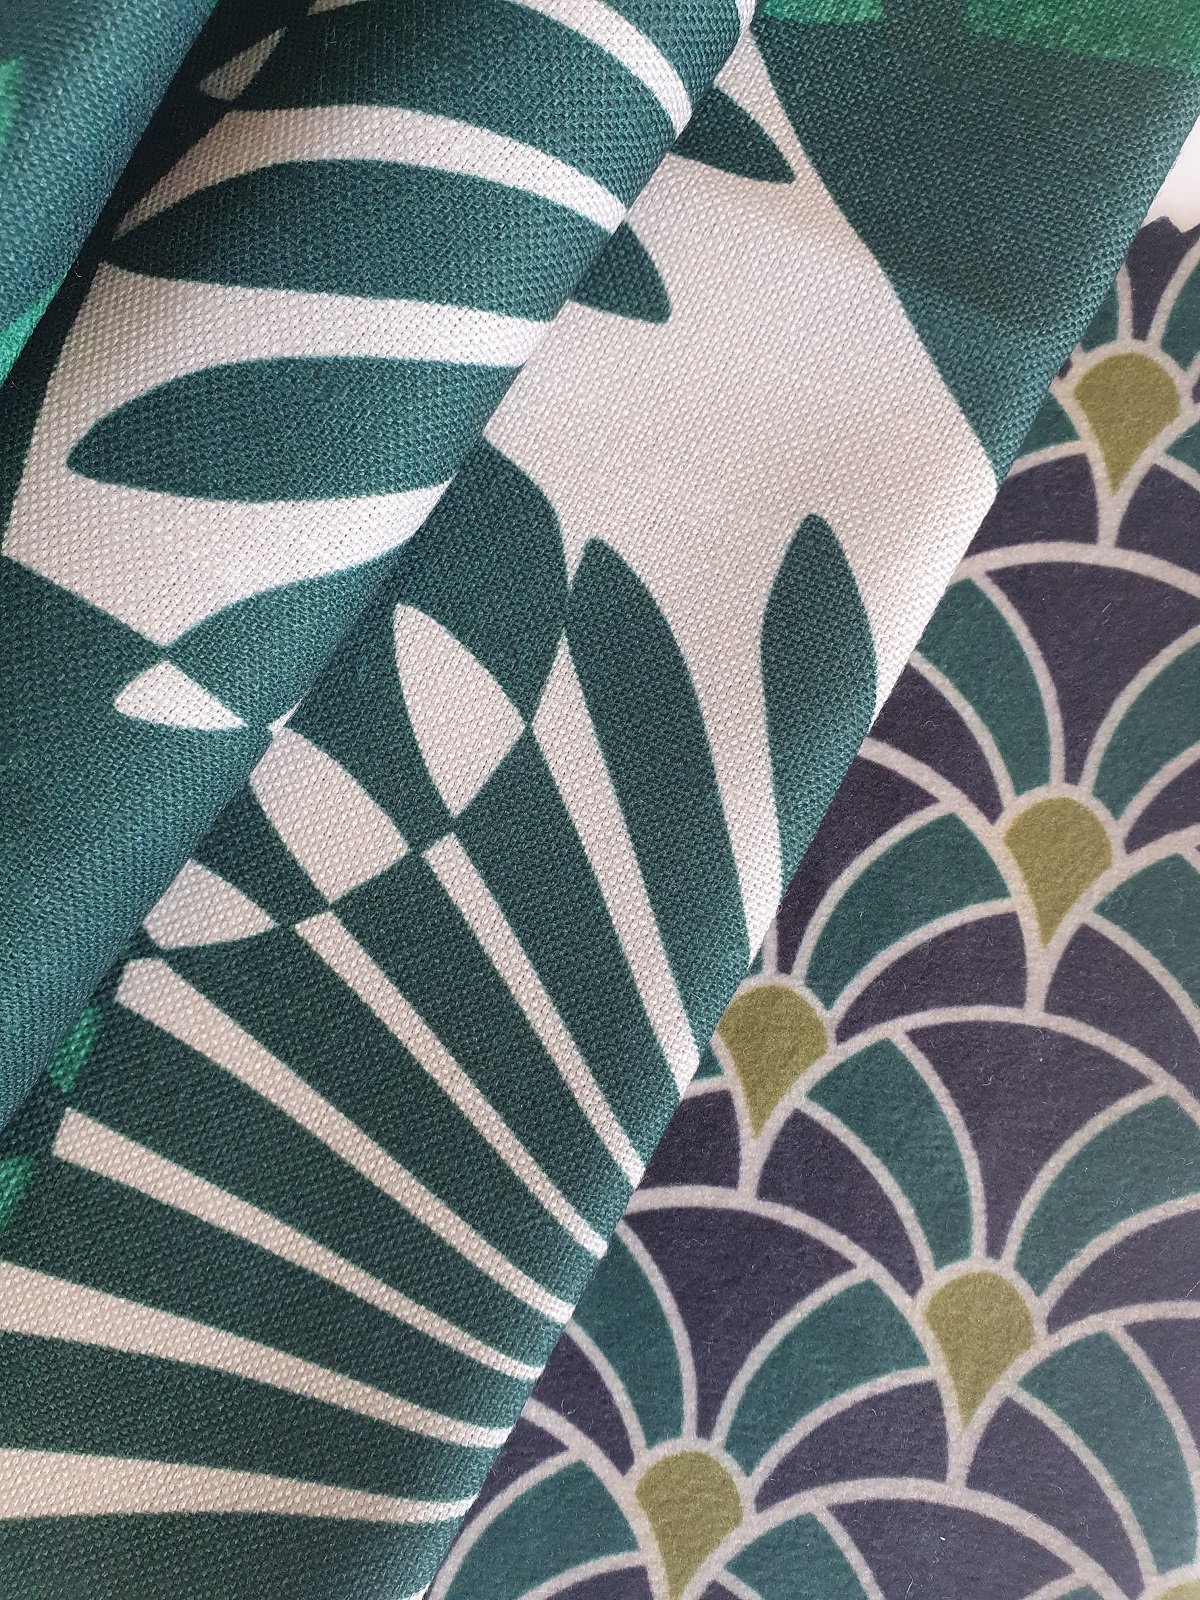 skopos fabrics from the Kimono and flamingo collections in blue and green colourway